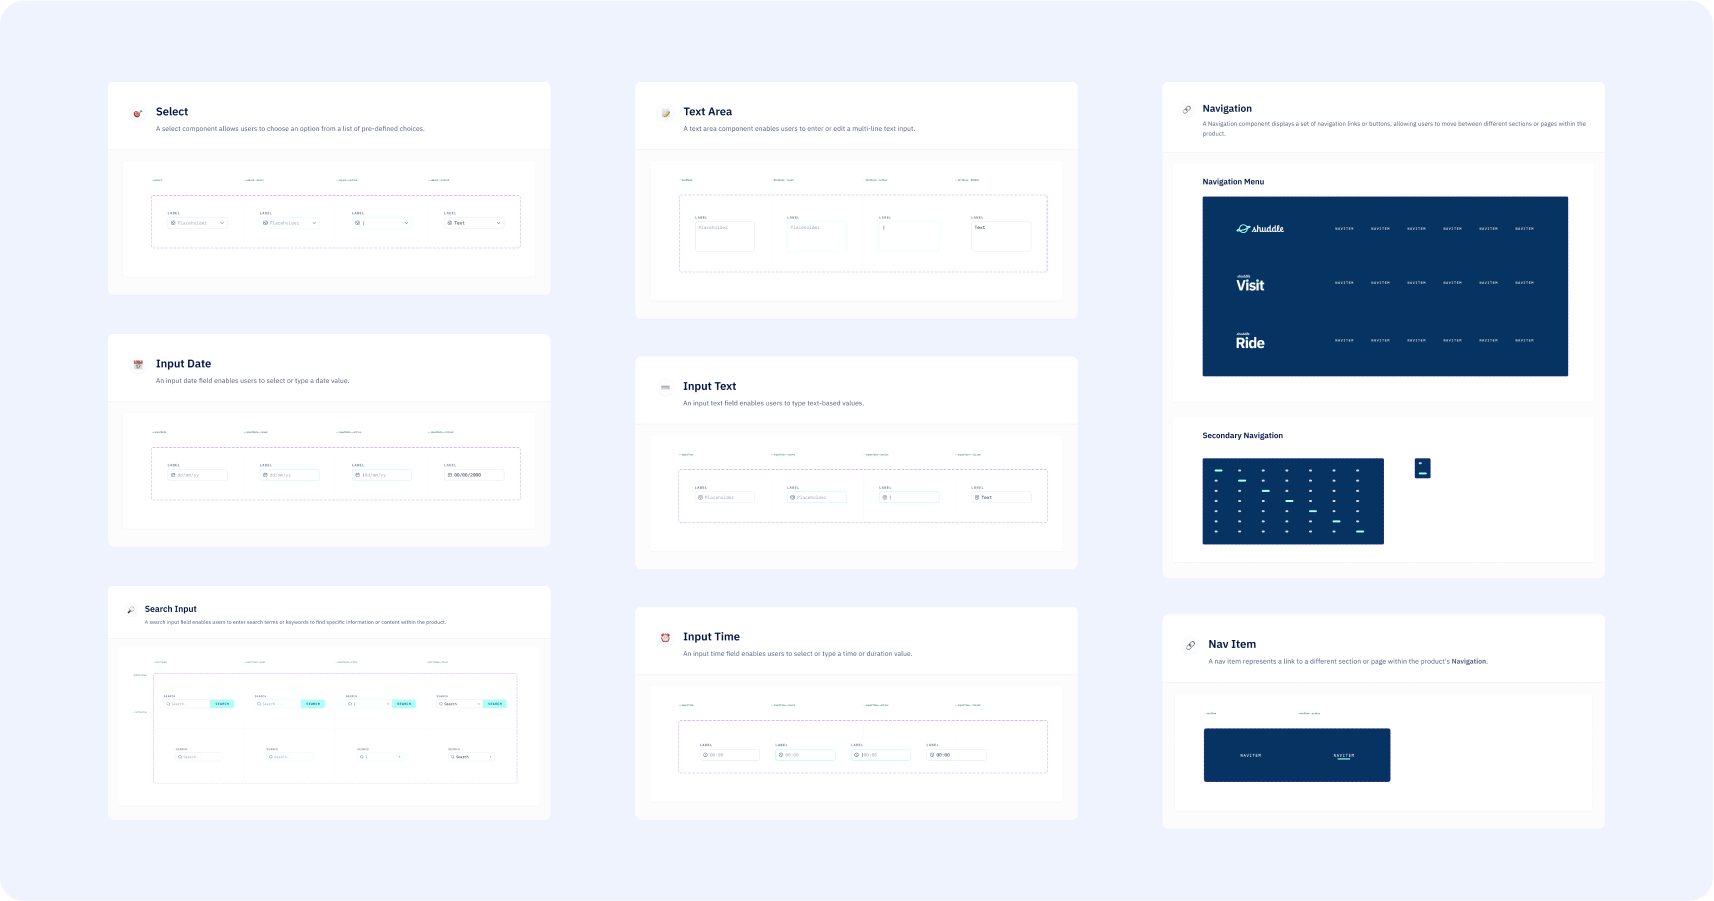 Snapshots of the final version of the Design System, including the select component, input fields (text, search, text area, time and date) and navigation components.